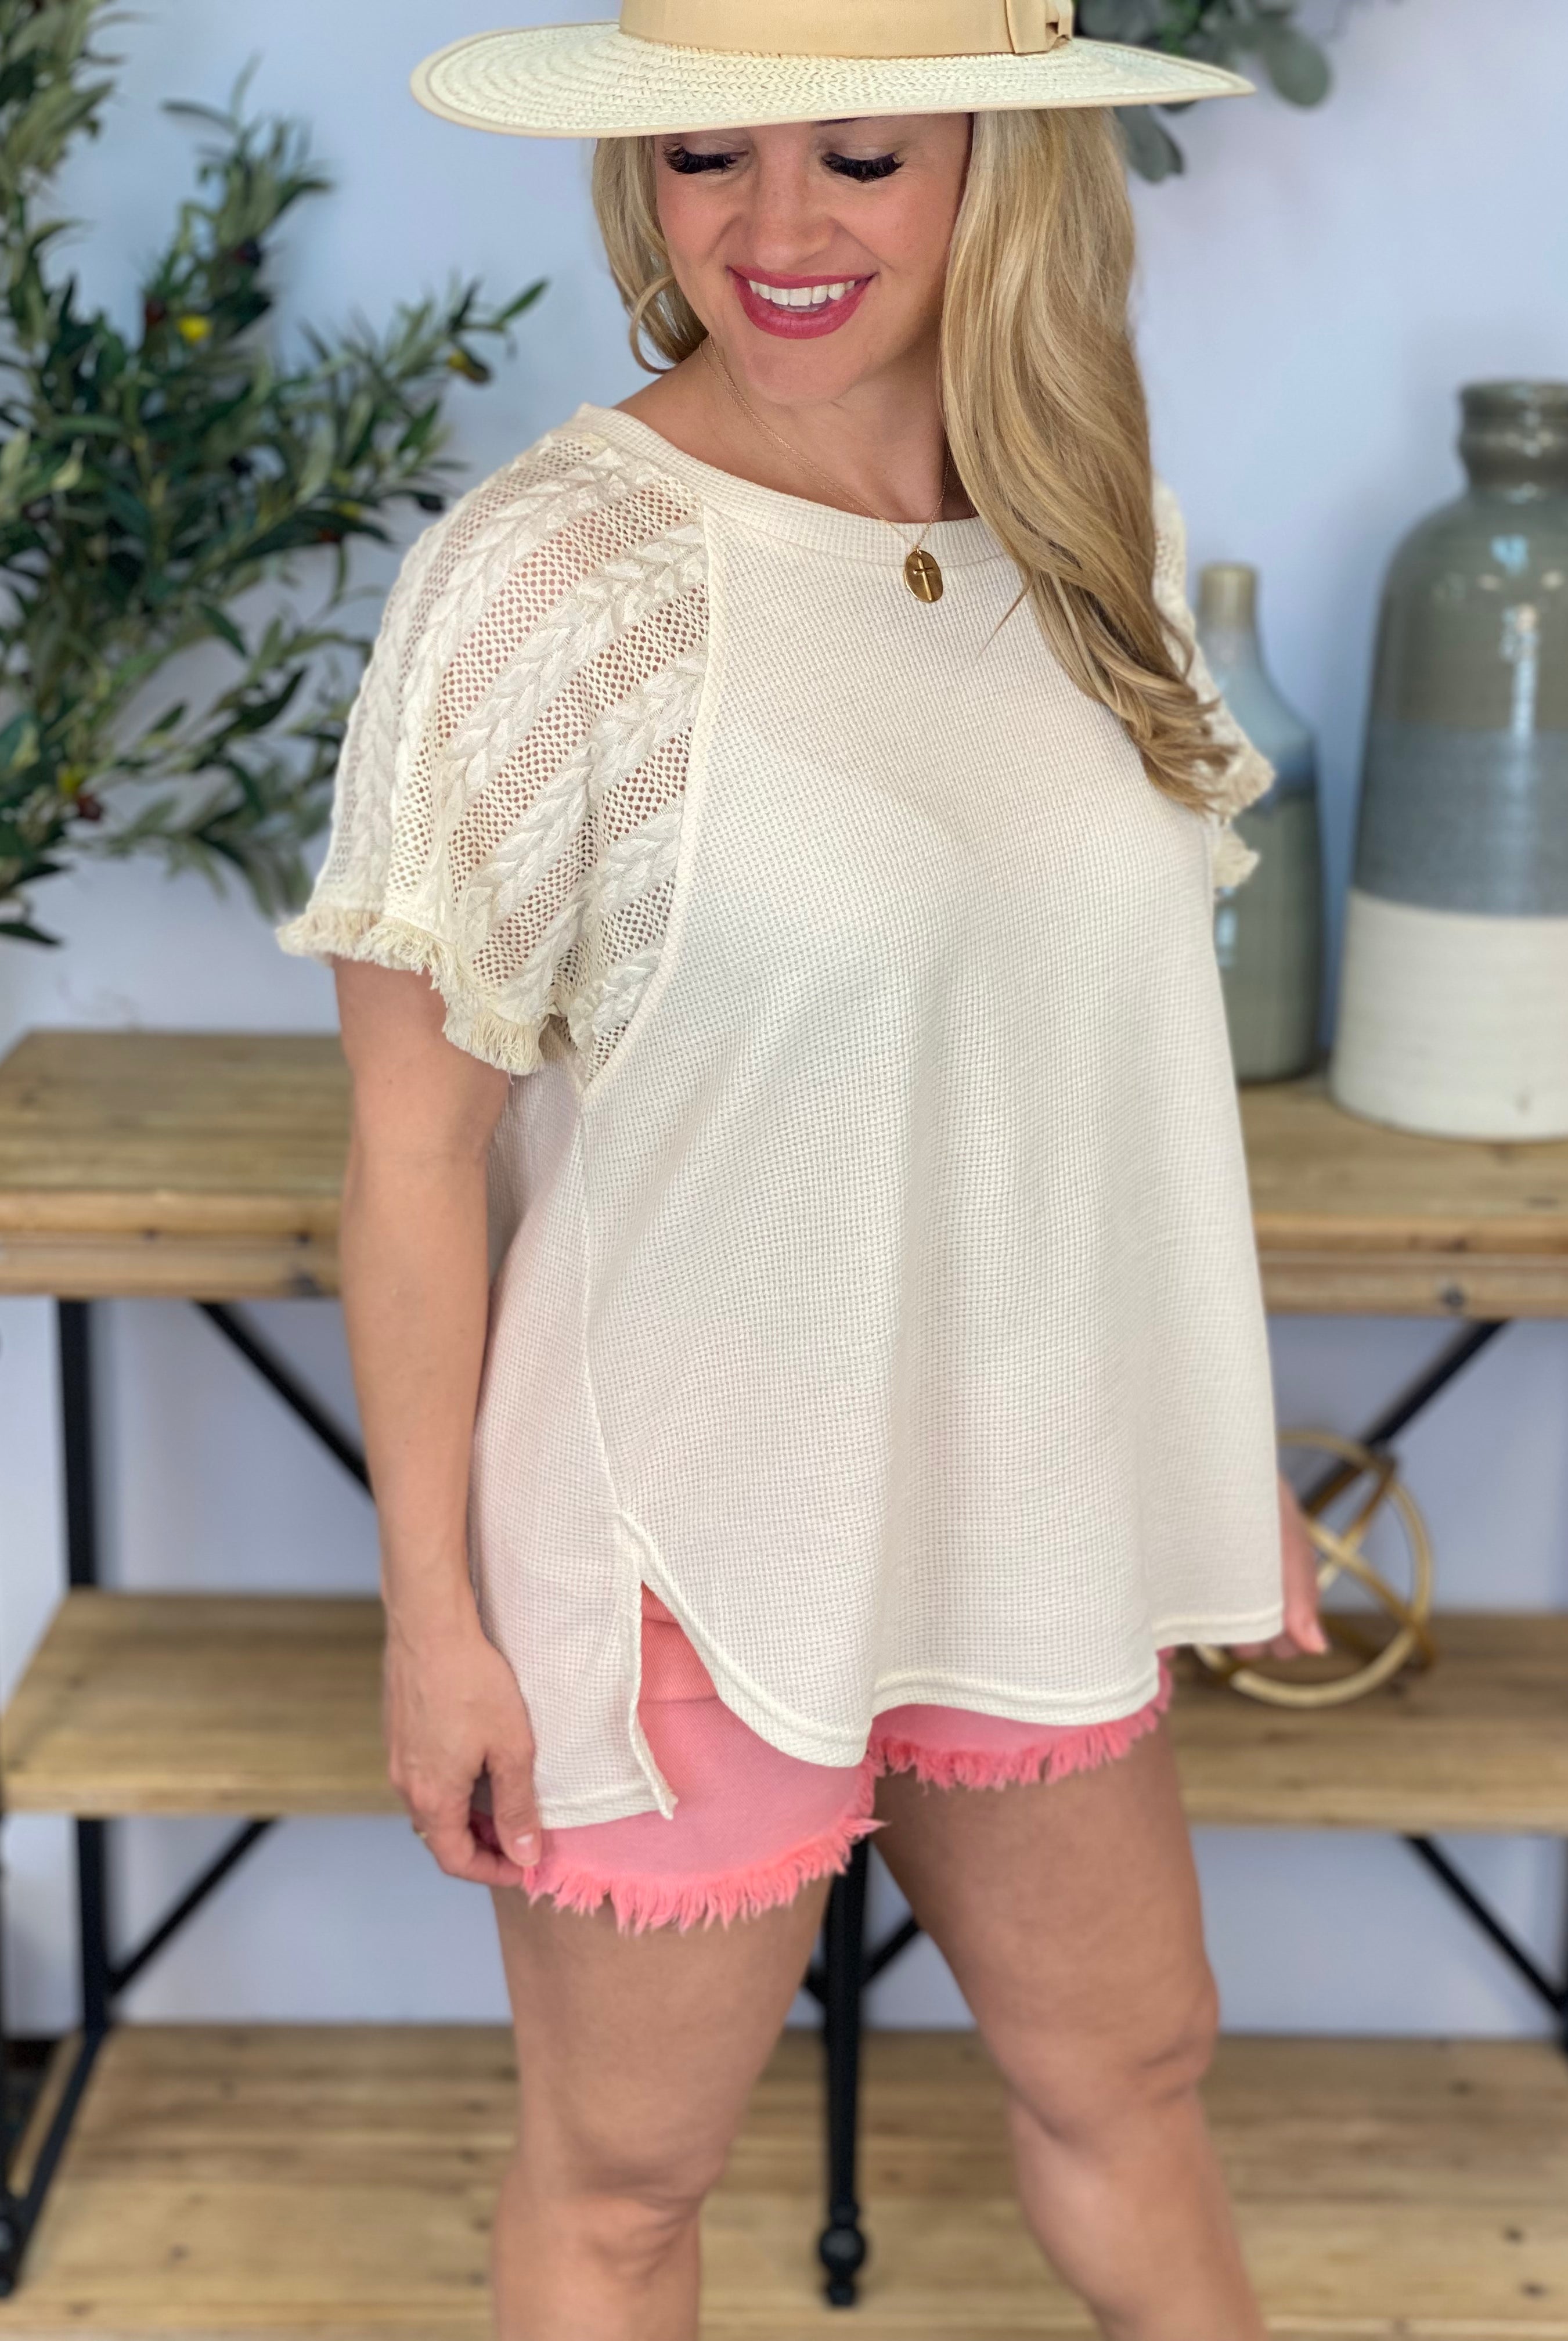 All in the Details Top - Cream-100 Short Sleeve Tops-The Lovely Closet-The Lovely Closet, Women's Fashion Boutique in Alexandria, KY